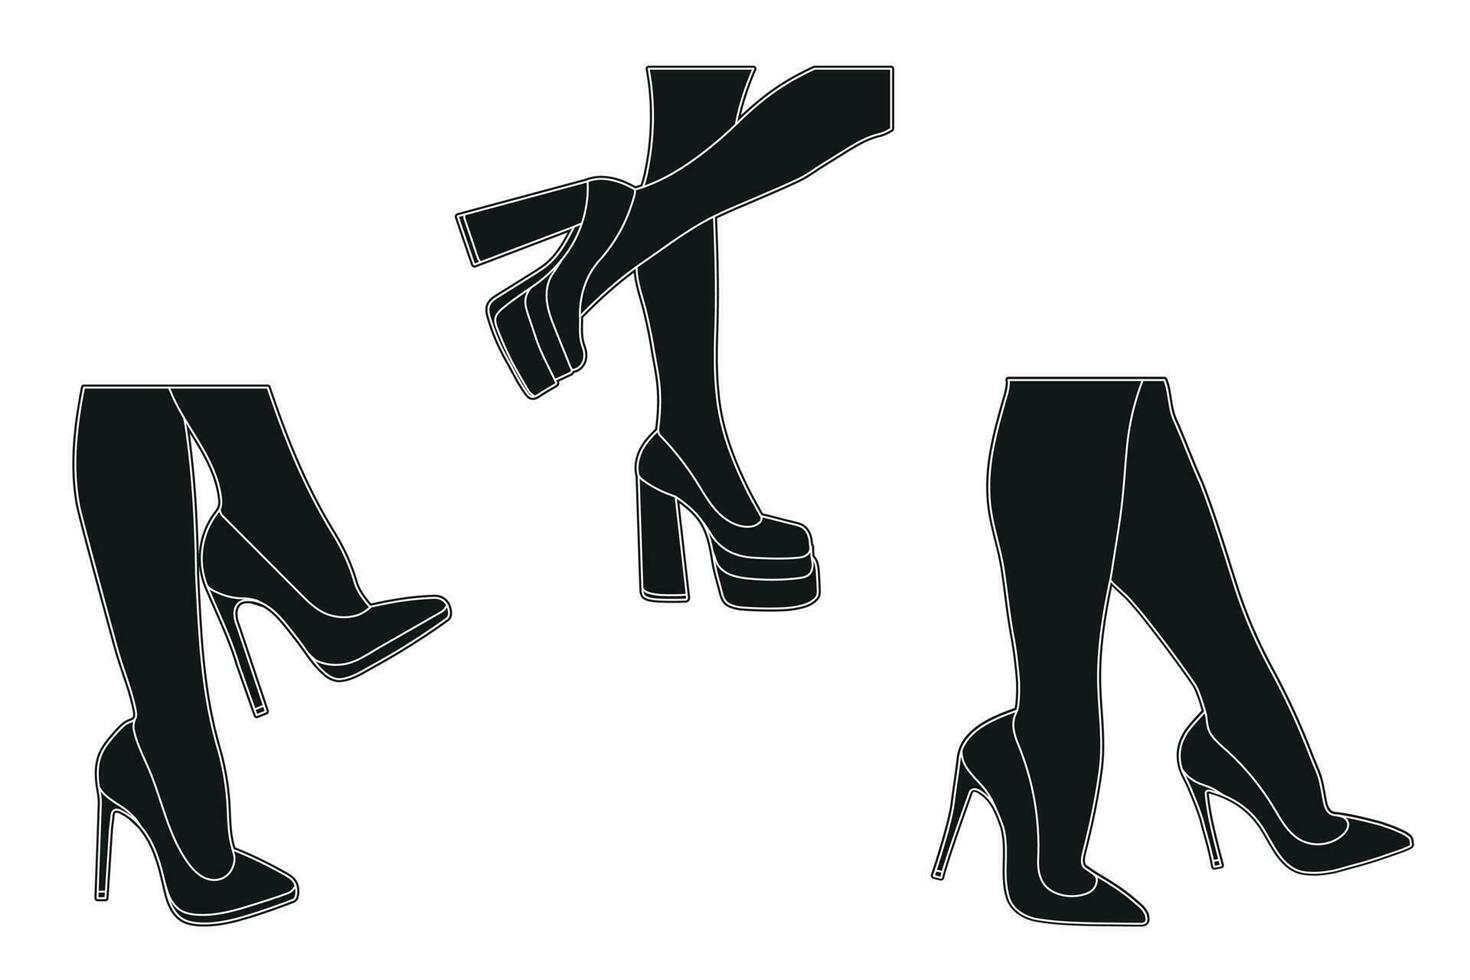 Line art silhouette outline of female legs in a pose. Shoes stilettos, high heels. Walking, standing, running, jumping, dance vector